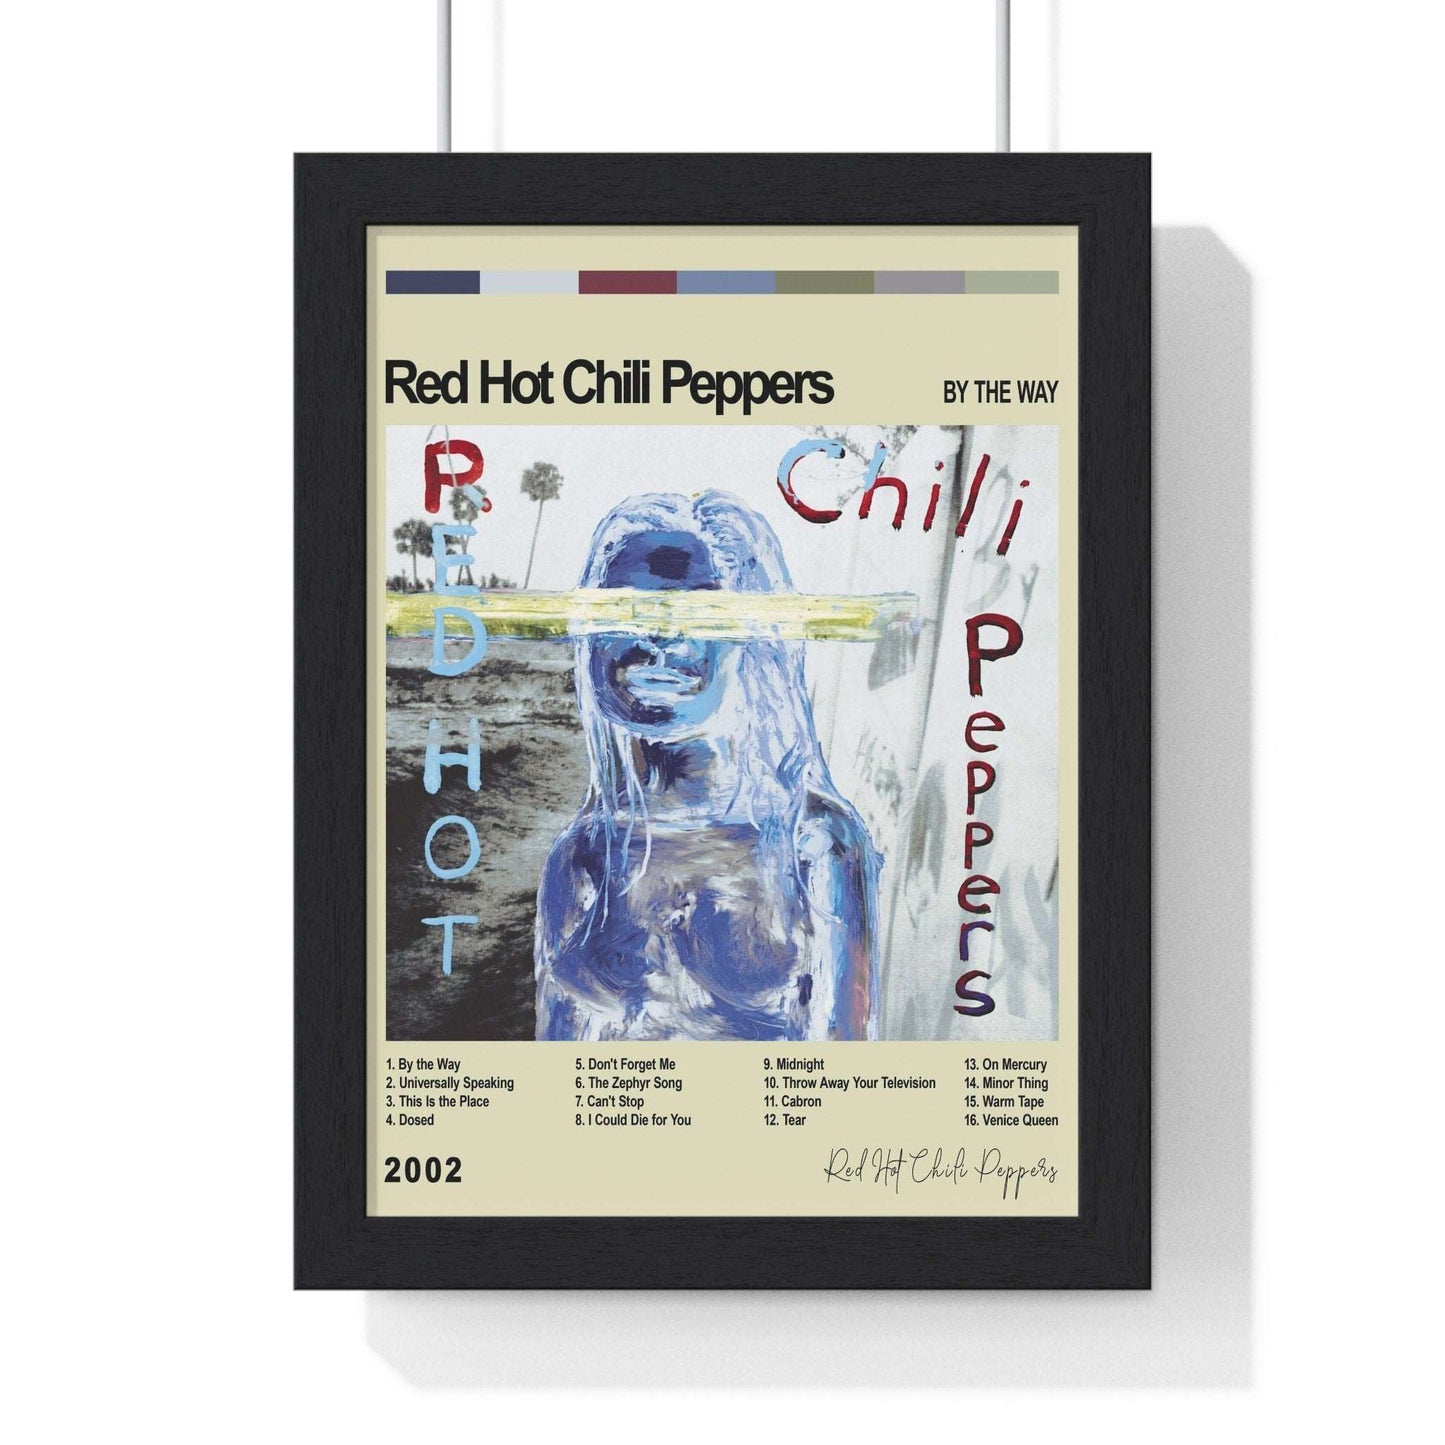 Red Hot Chilli Peppers - Album Cover Poster - Poster Kingz